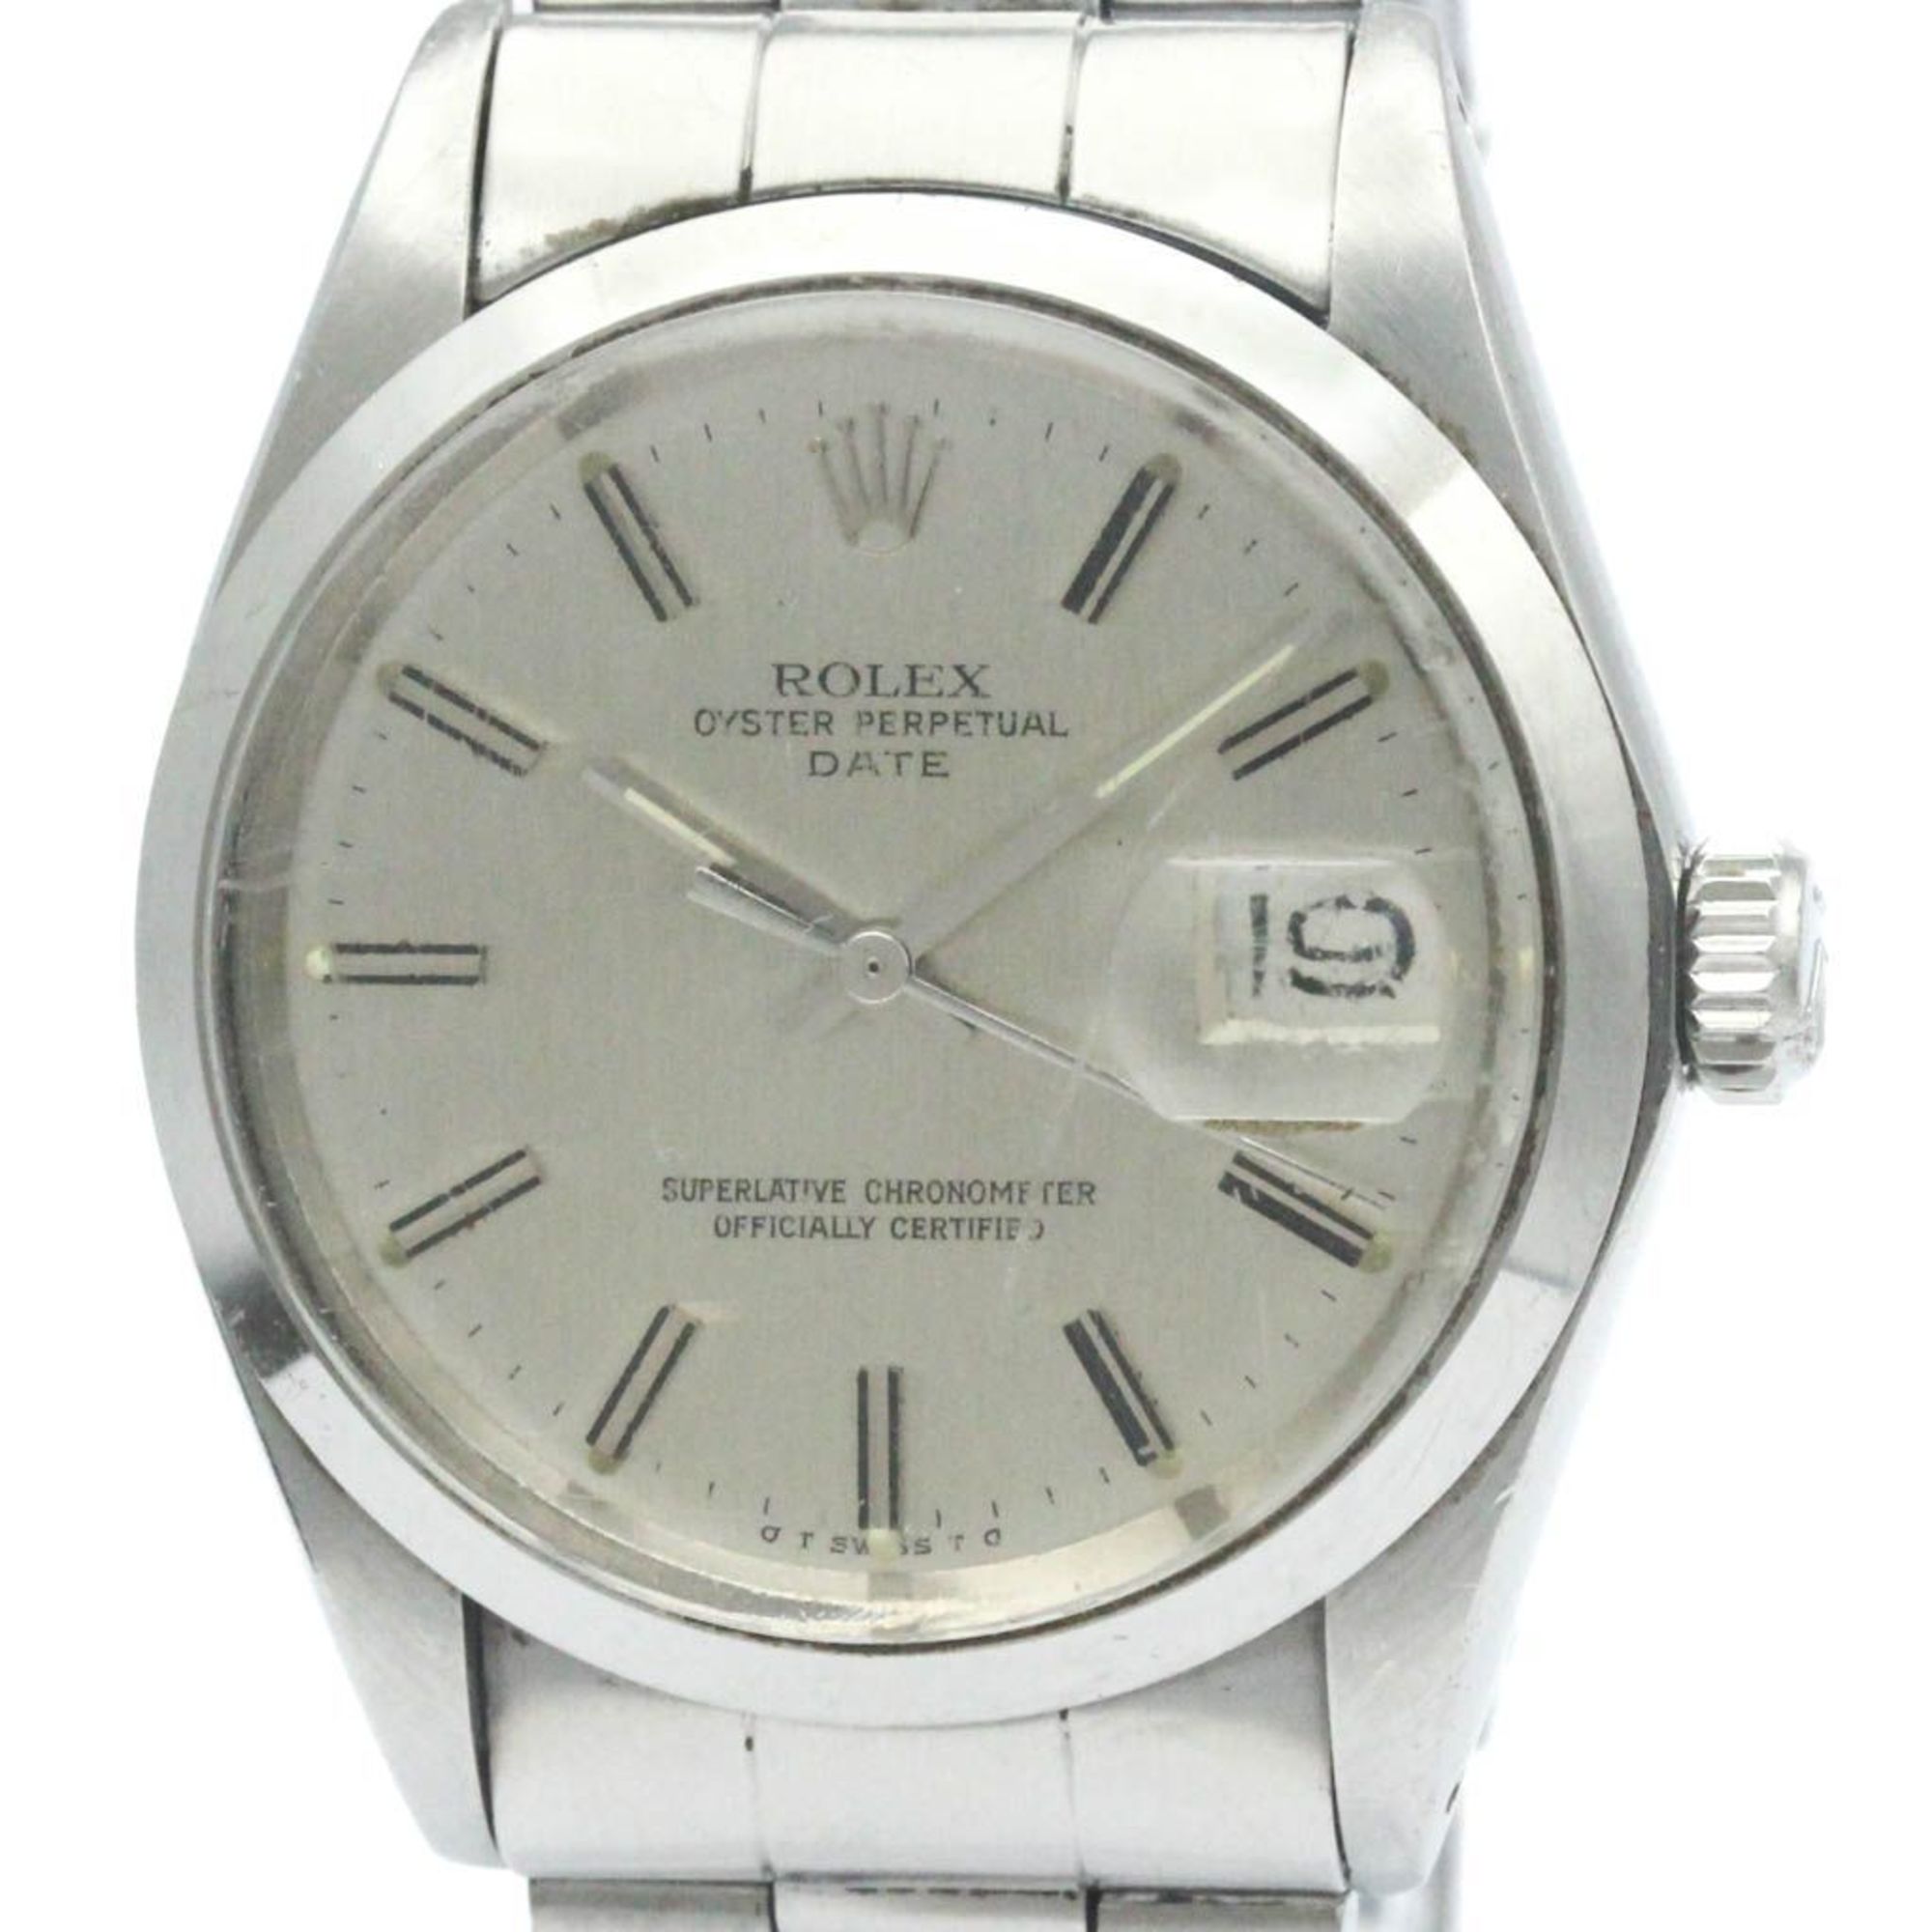 Vintage ROLEX Oyster Perpetual Date 1500 Steel Automatic Mens Watch BF568492